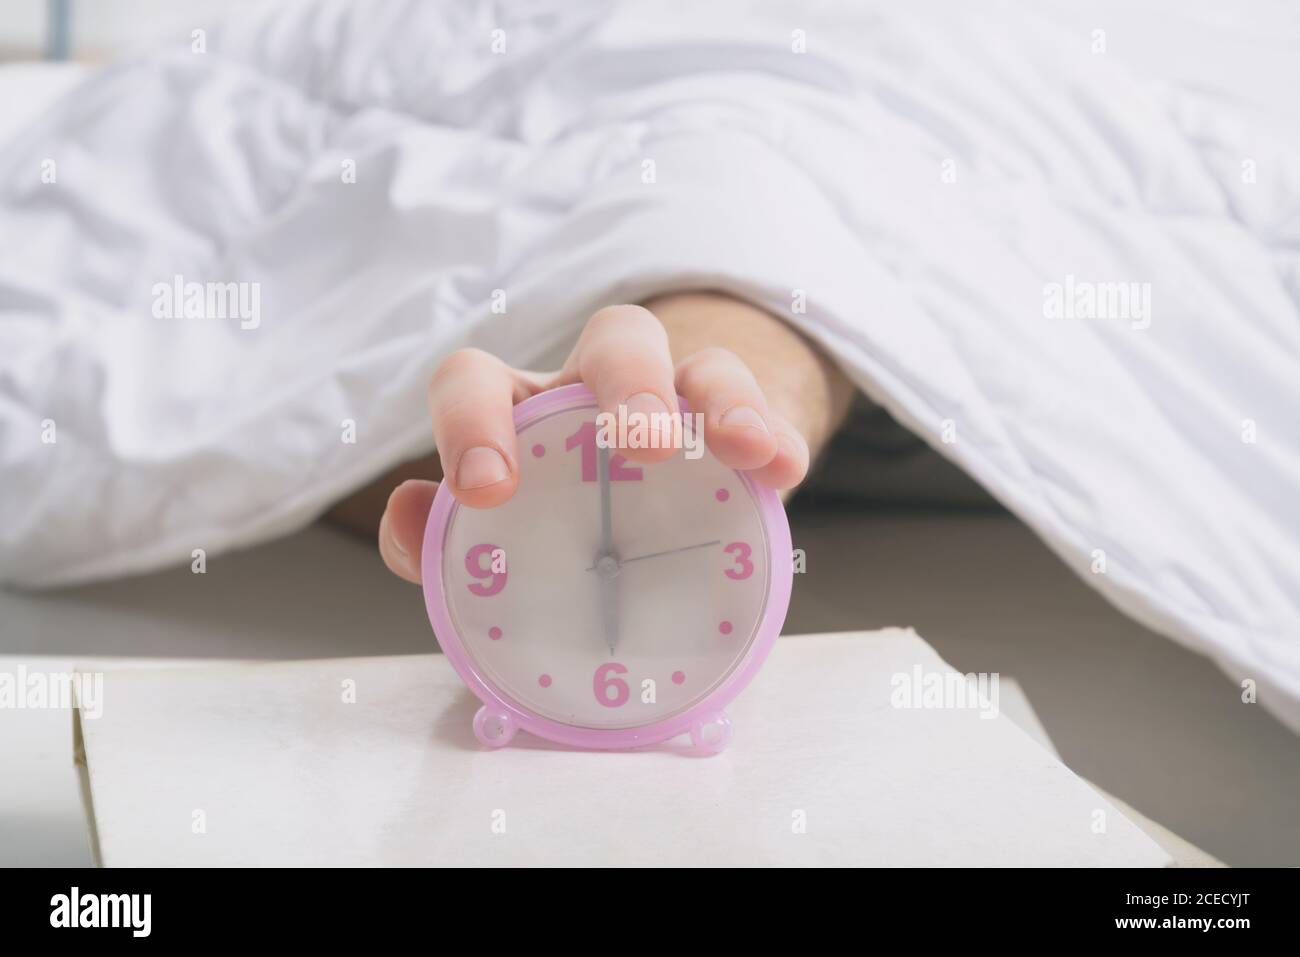 Hand on clock, time to wake up Stock Photo